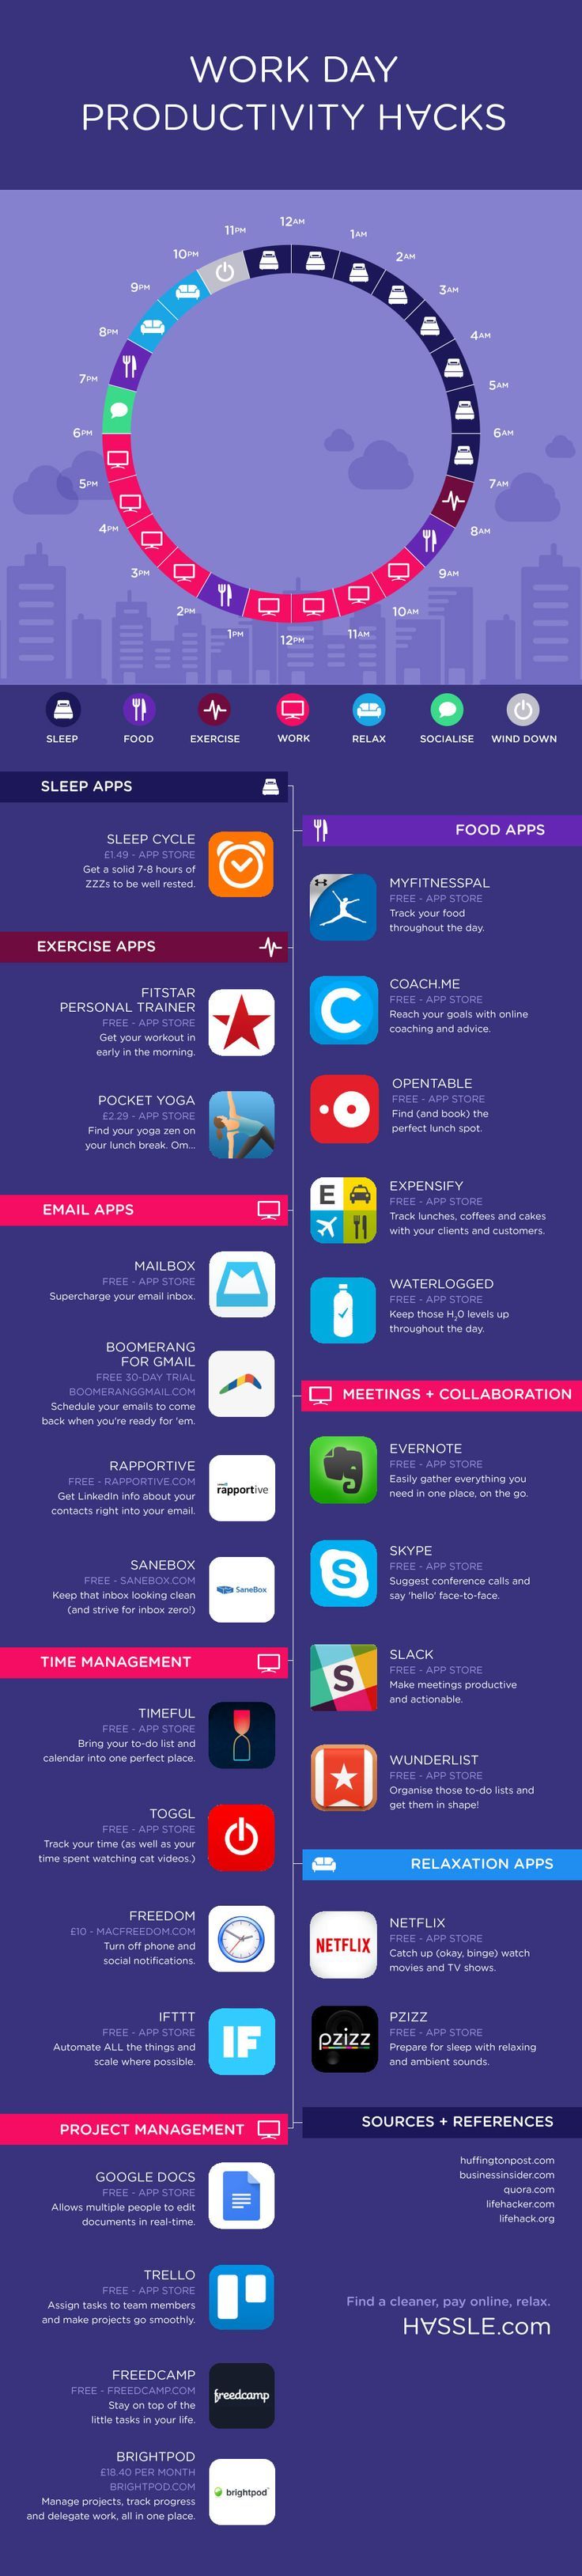 26 Of The Best Productivity Apps In One Infographic - LifeHack